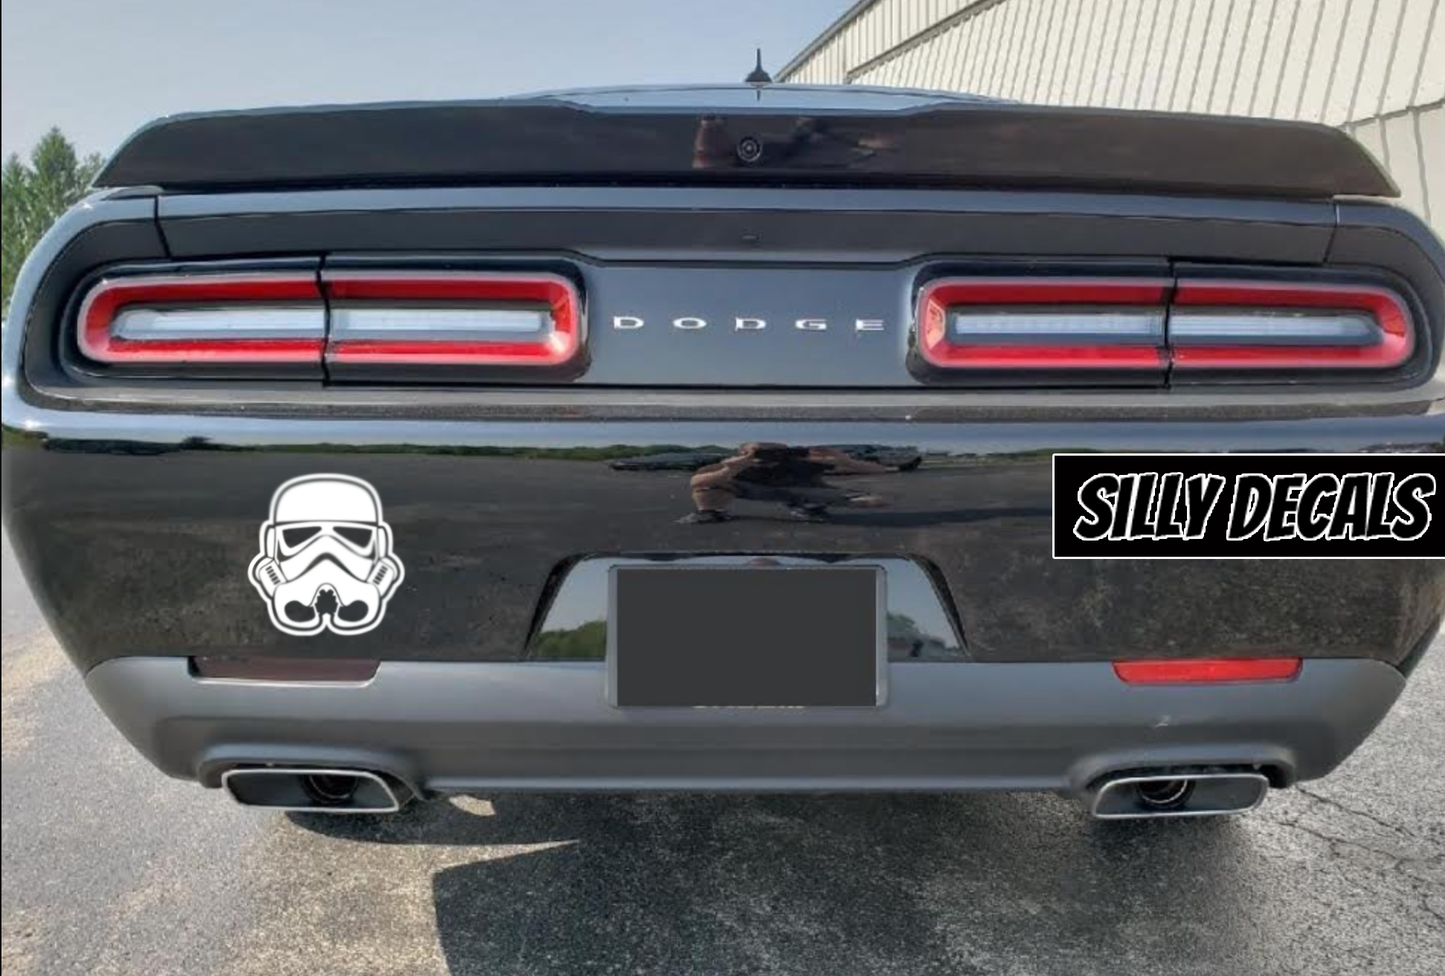 StormTrooper; StarWars Inspired Vinyl Decals Suitable For Cars, Windows, Walls, and More!